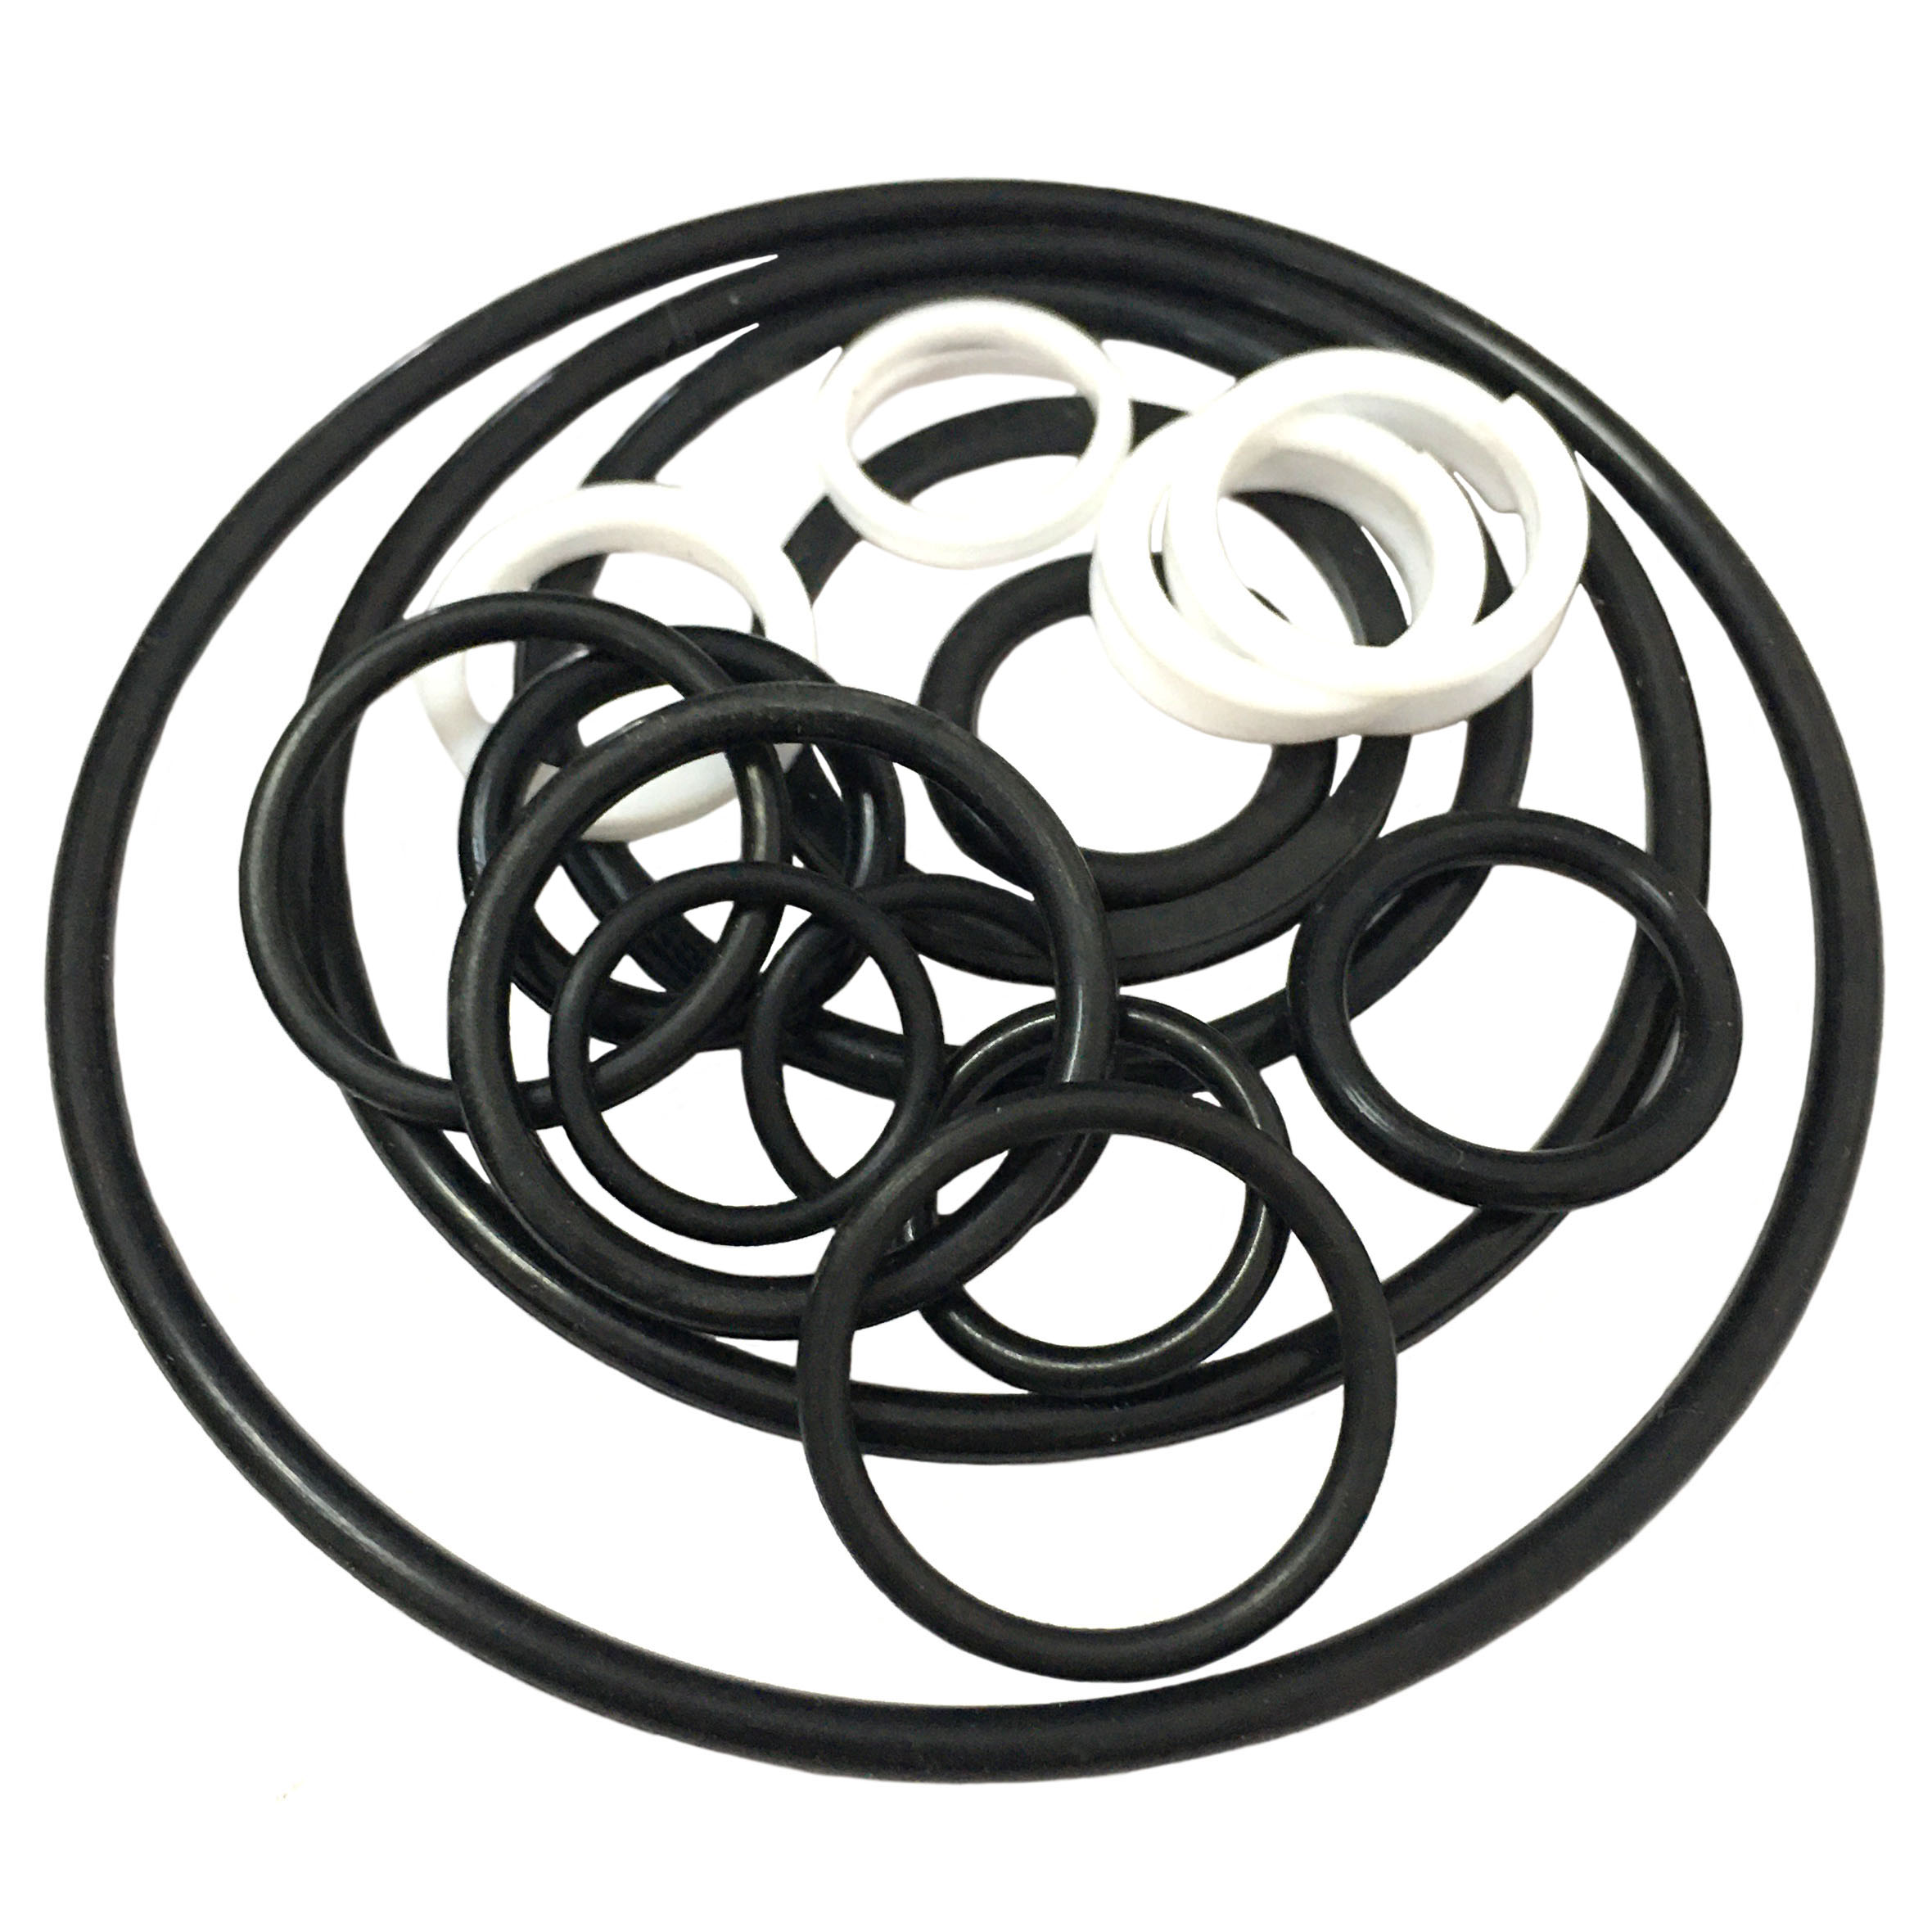 OE 82981112 Rubber Ring Seal Repair Kits New Holan D Agriculture Tractor Power Steering Seal Kit